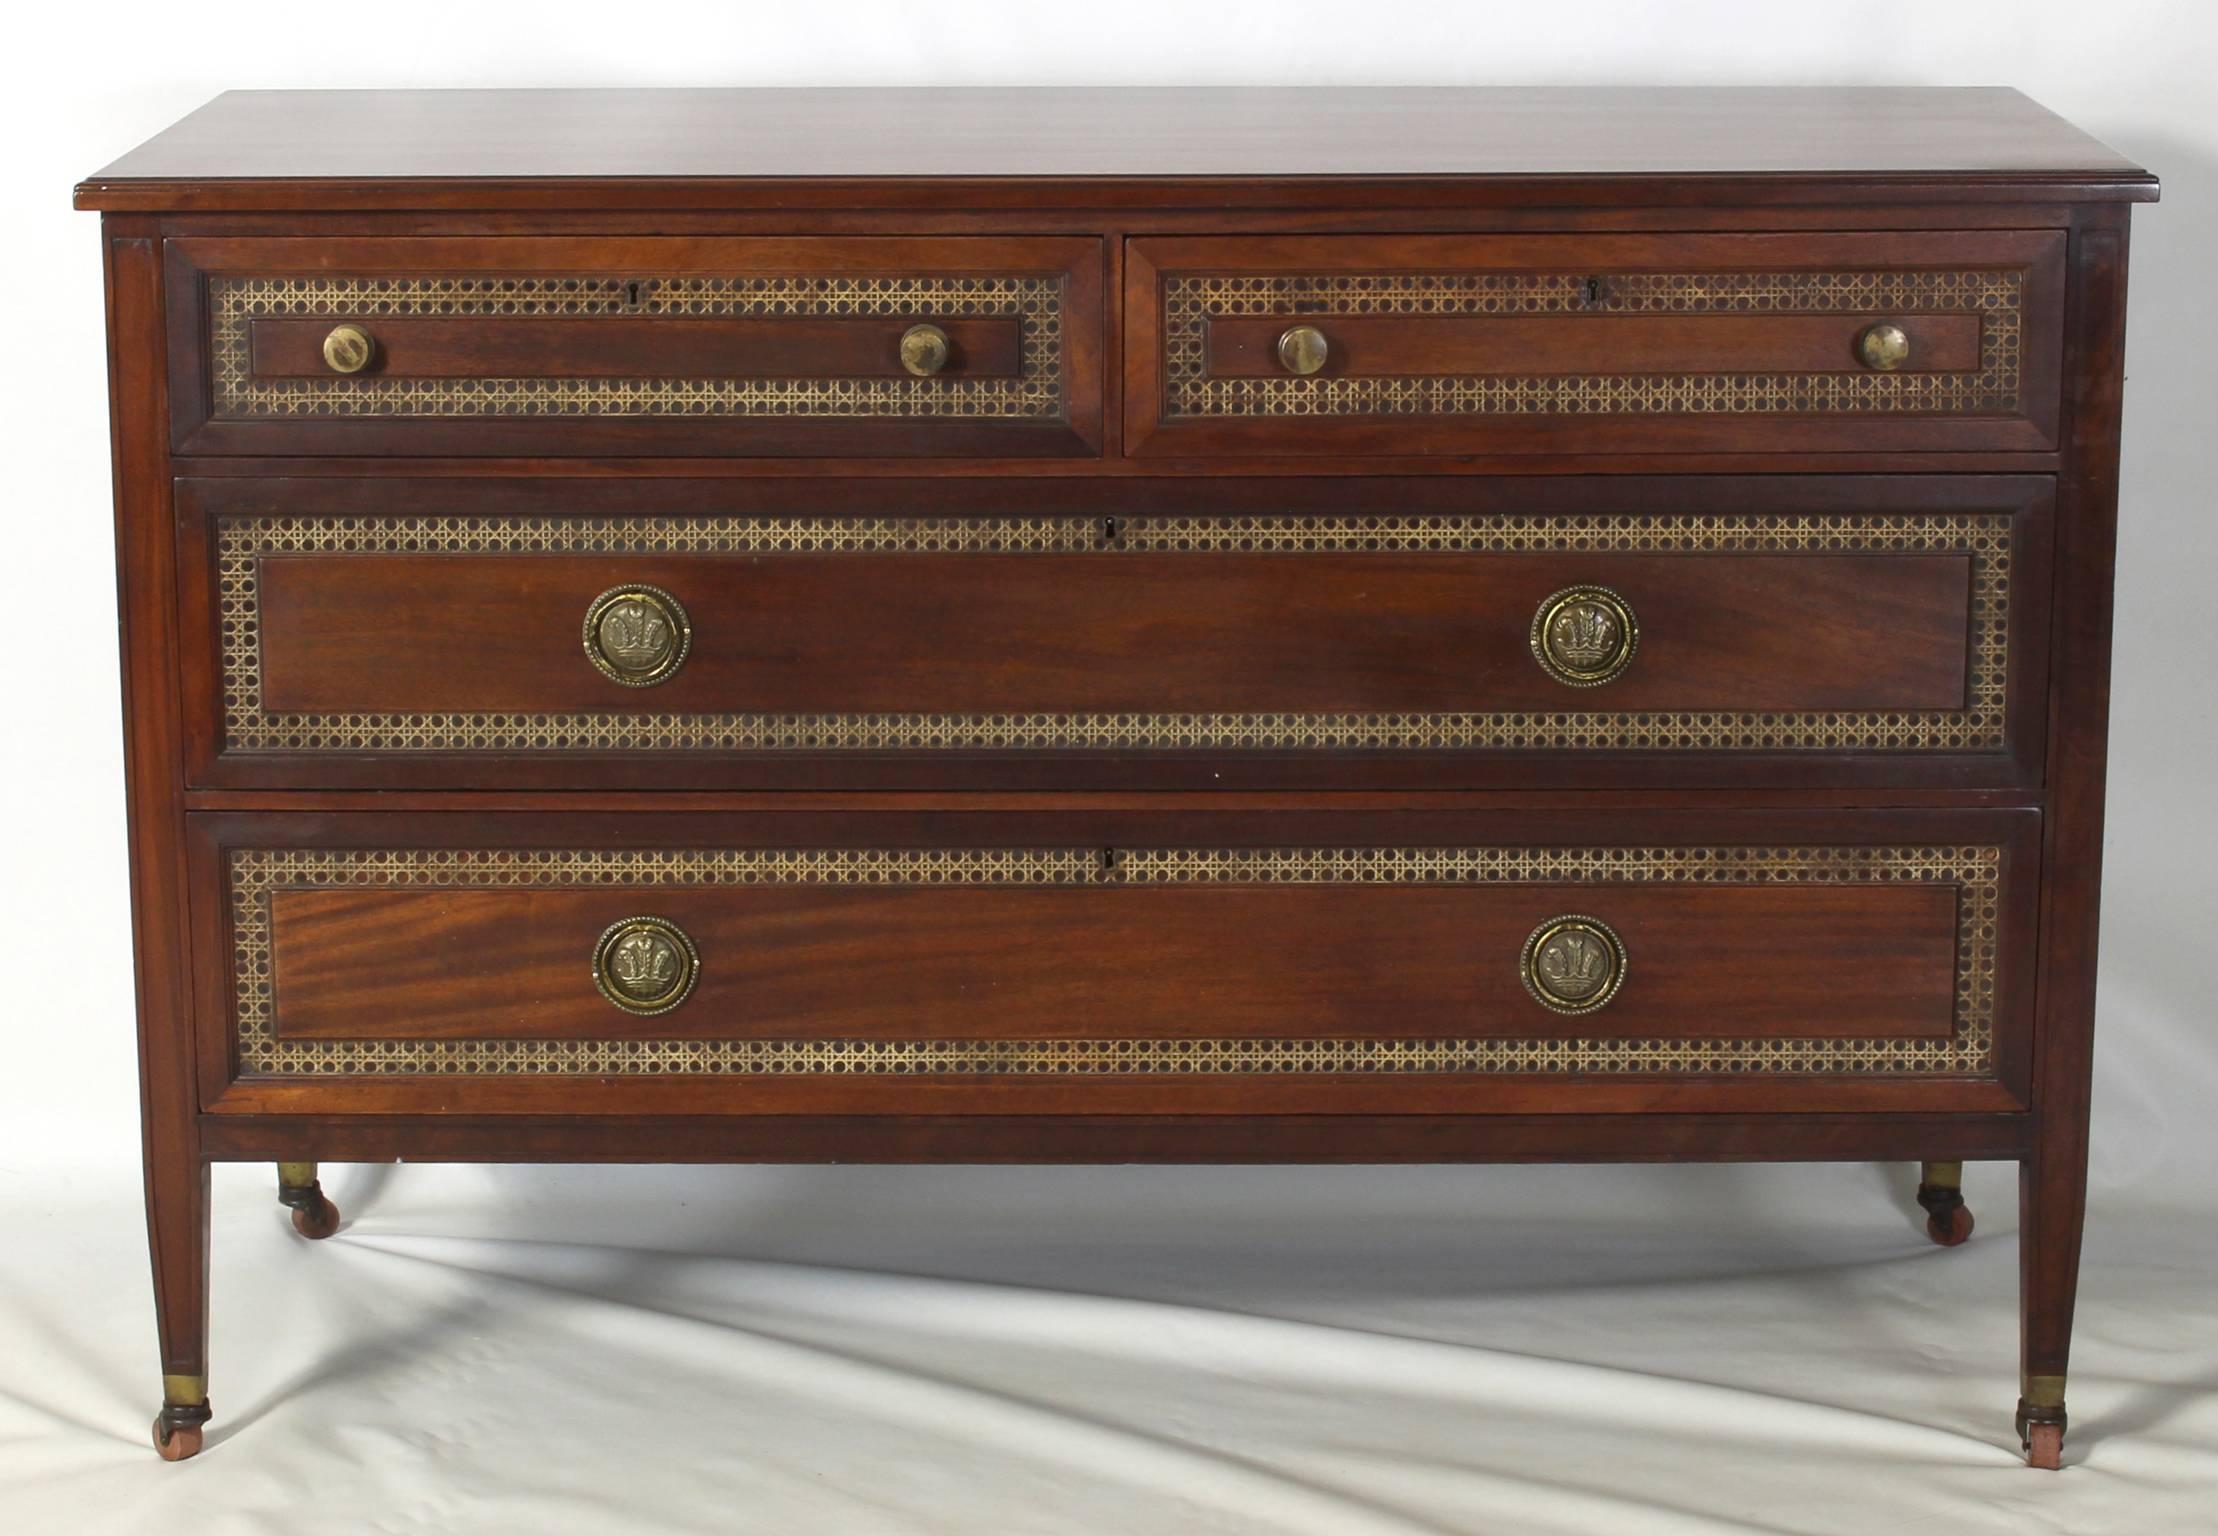 An early 20th century American made commode or chest of drawers made of solid mahogany accented with cane inset panels and hand-cast brass pulls.